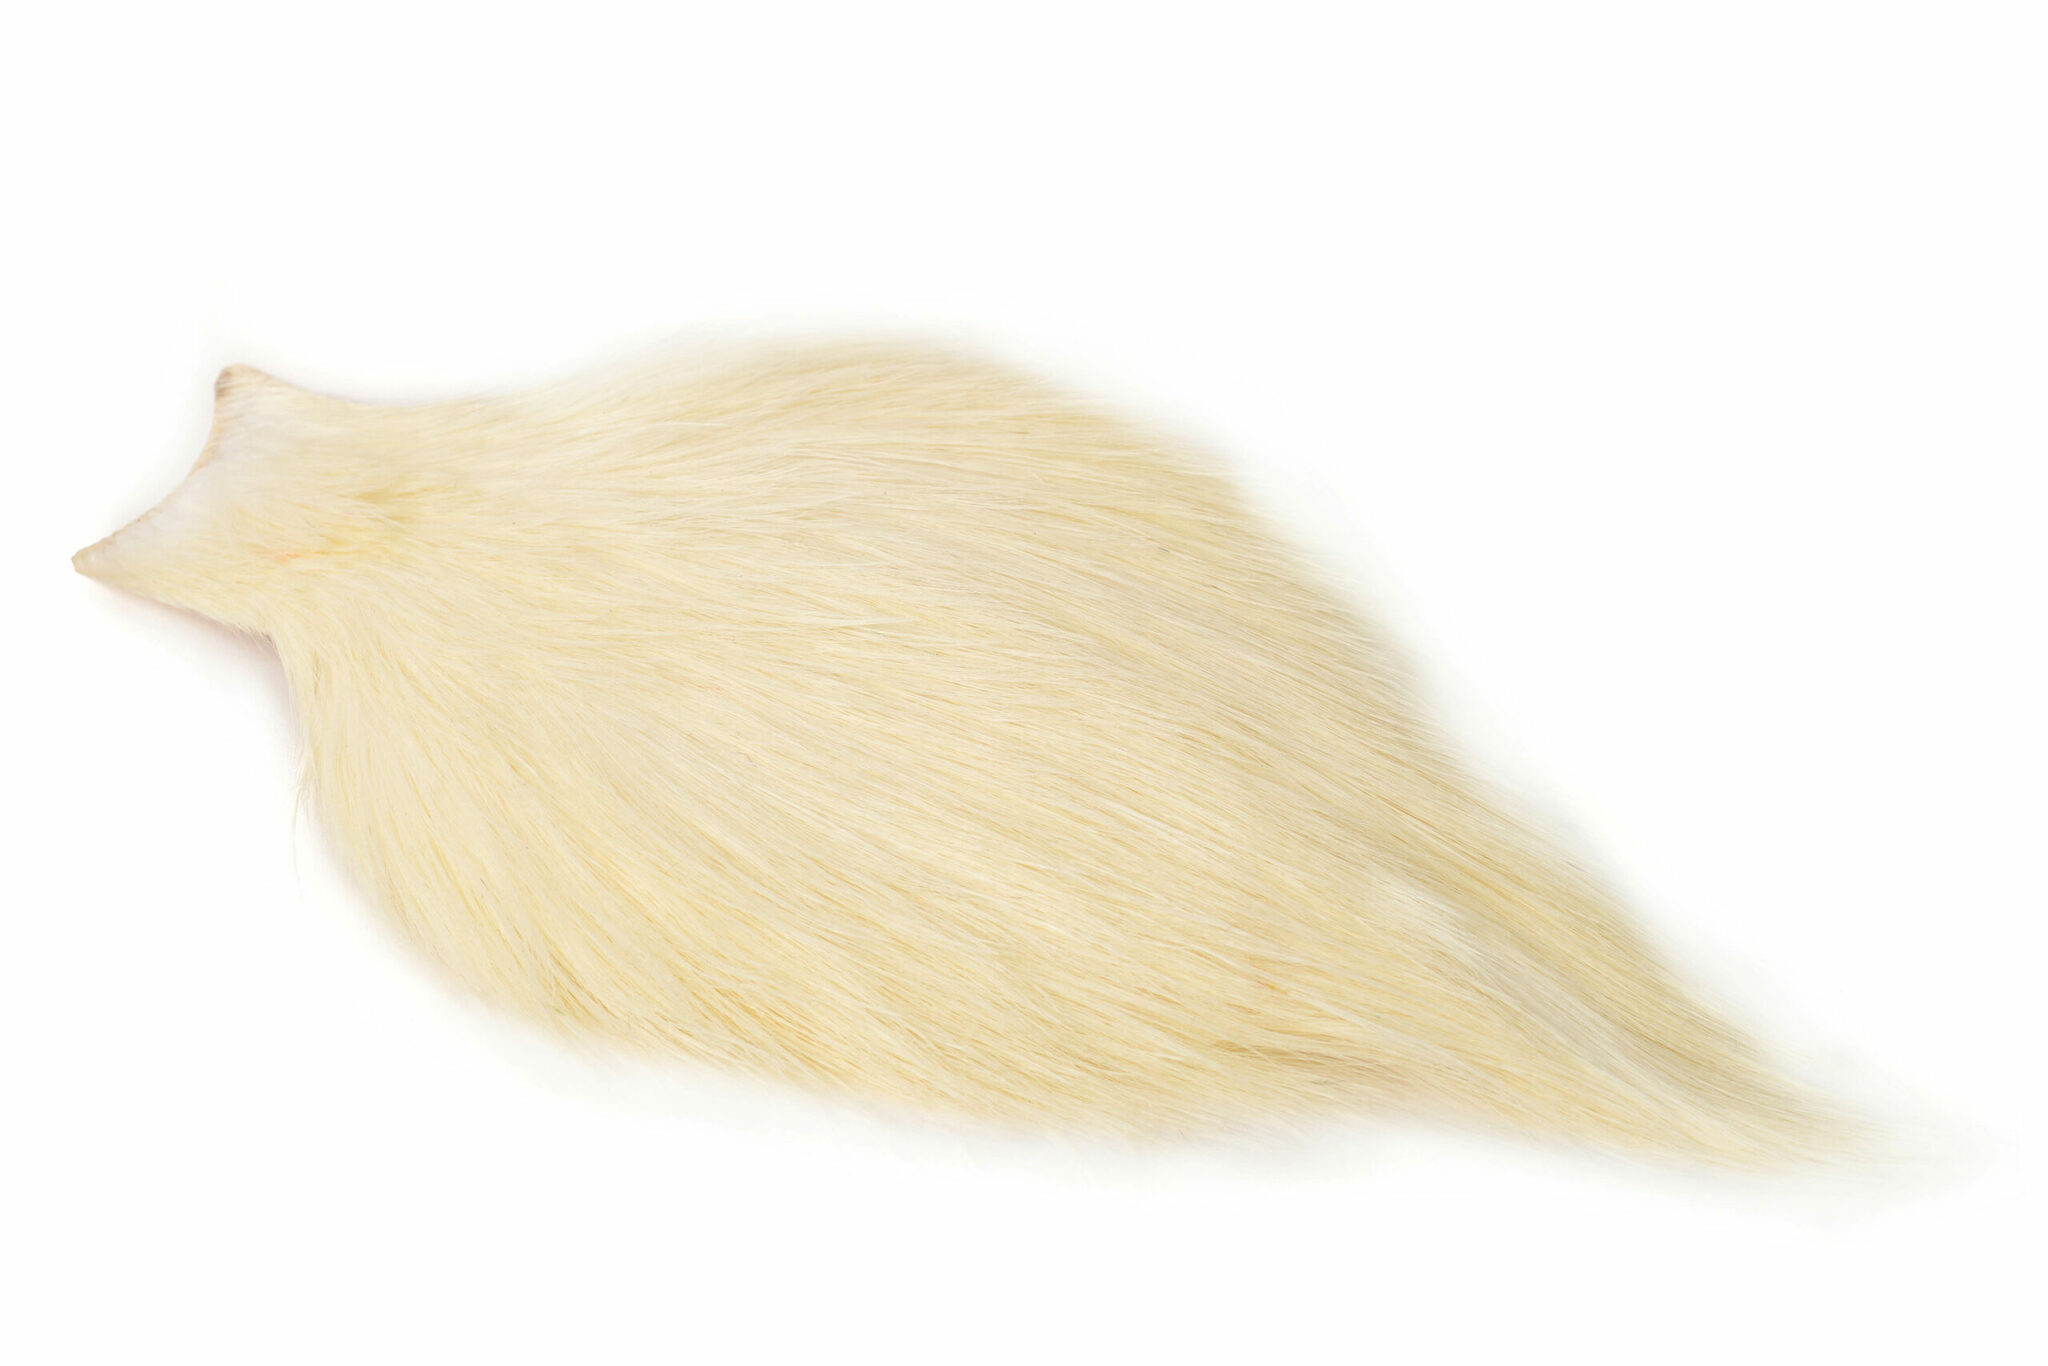 Whiting Spey Hackle Cape Silver - White